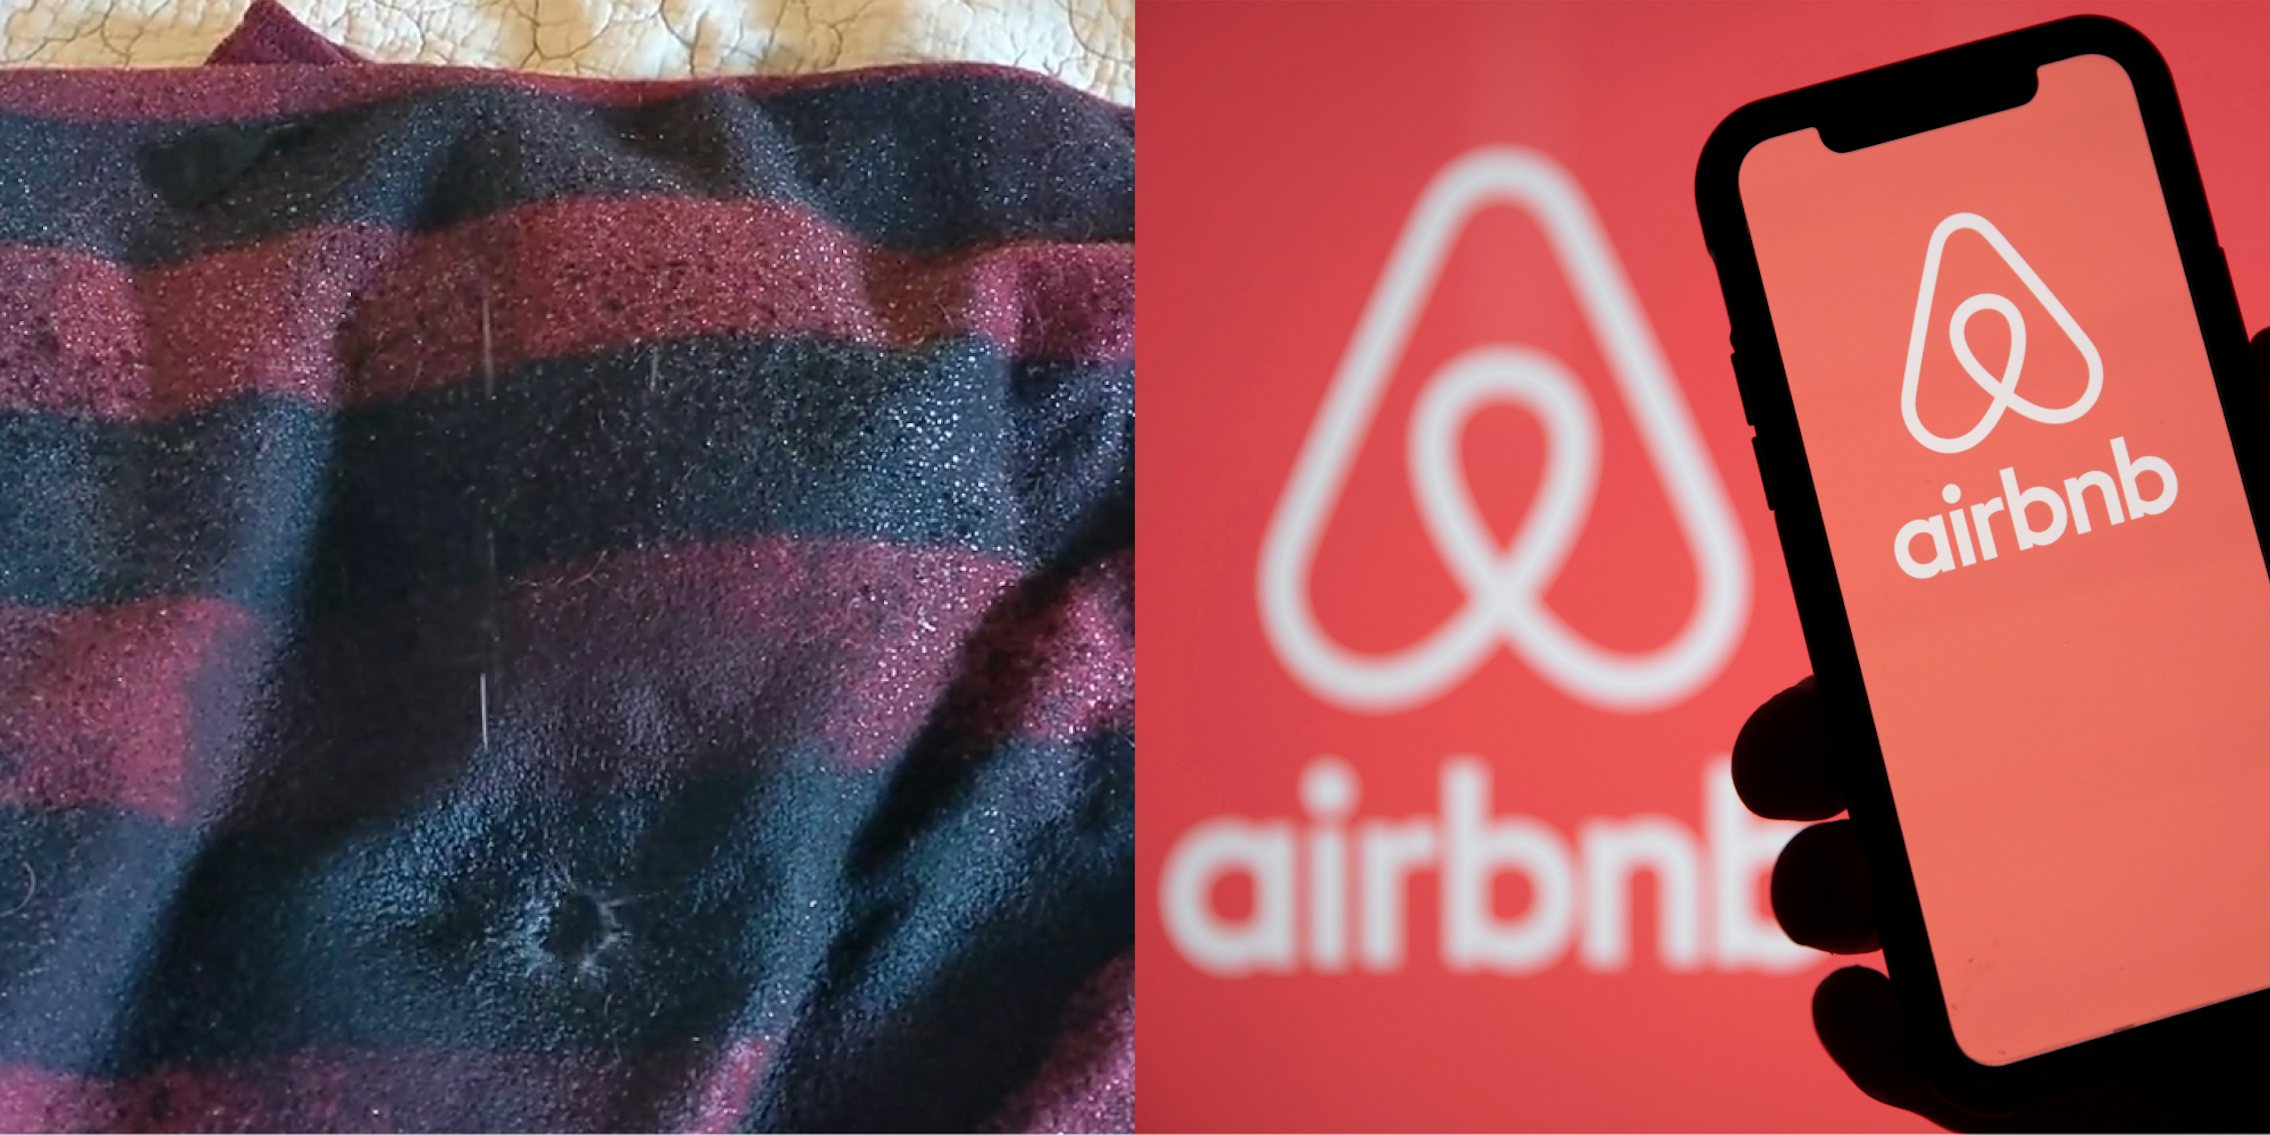 drops splattering on fabric (l) hand silhouette holding phone with Airbnb app open in front of Airbnb background (r)